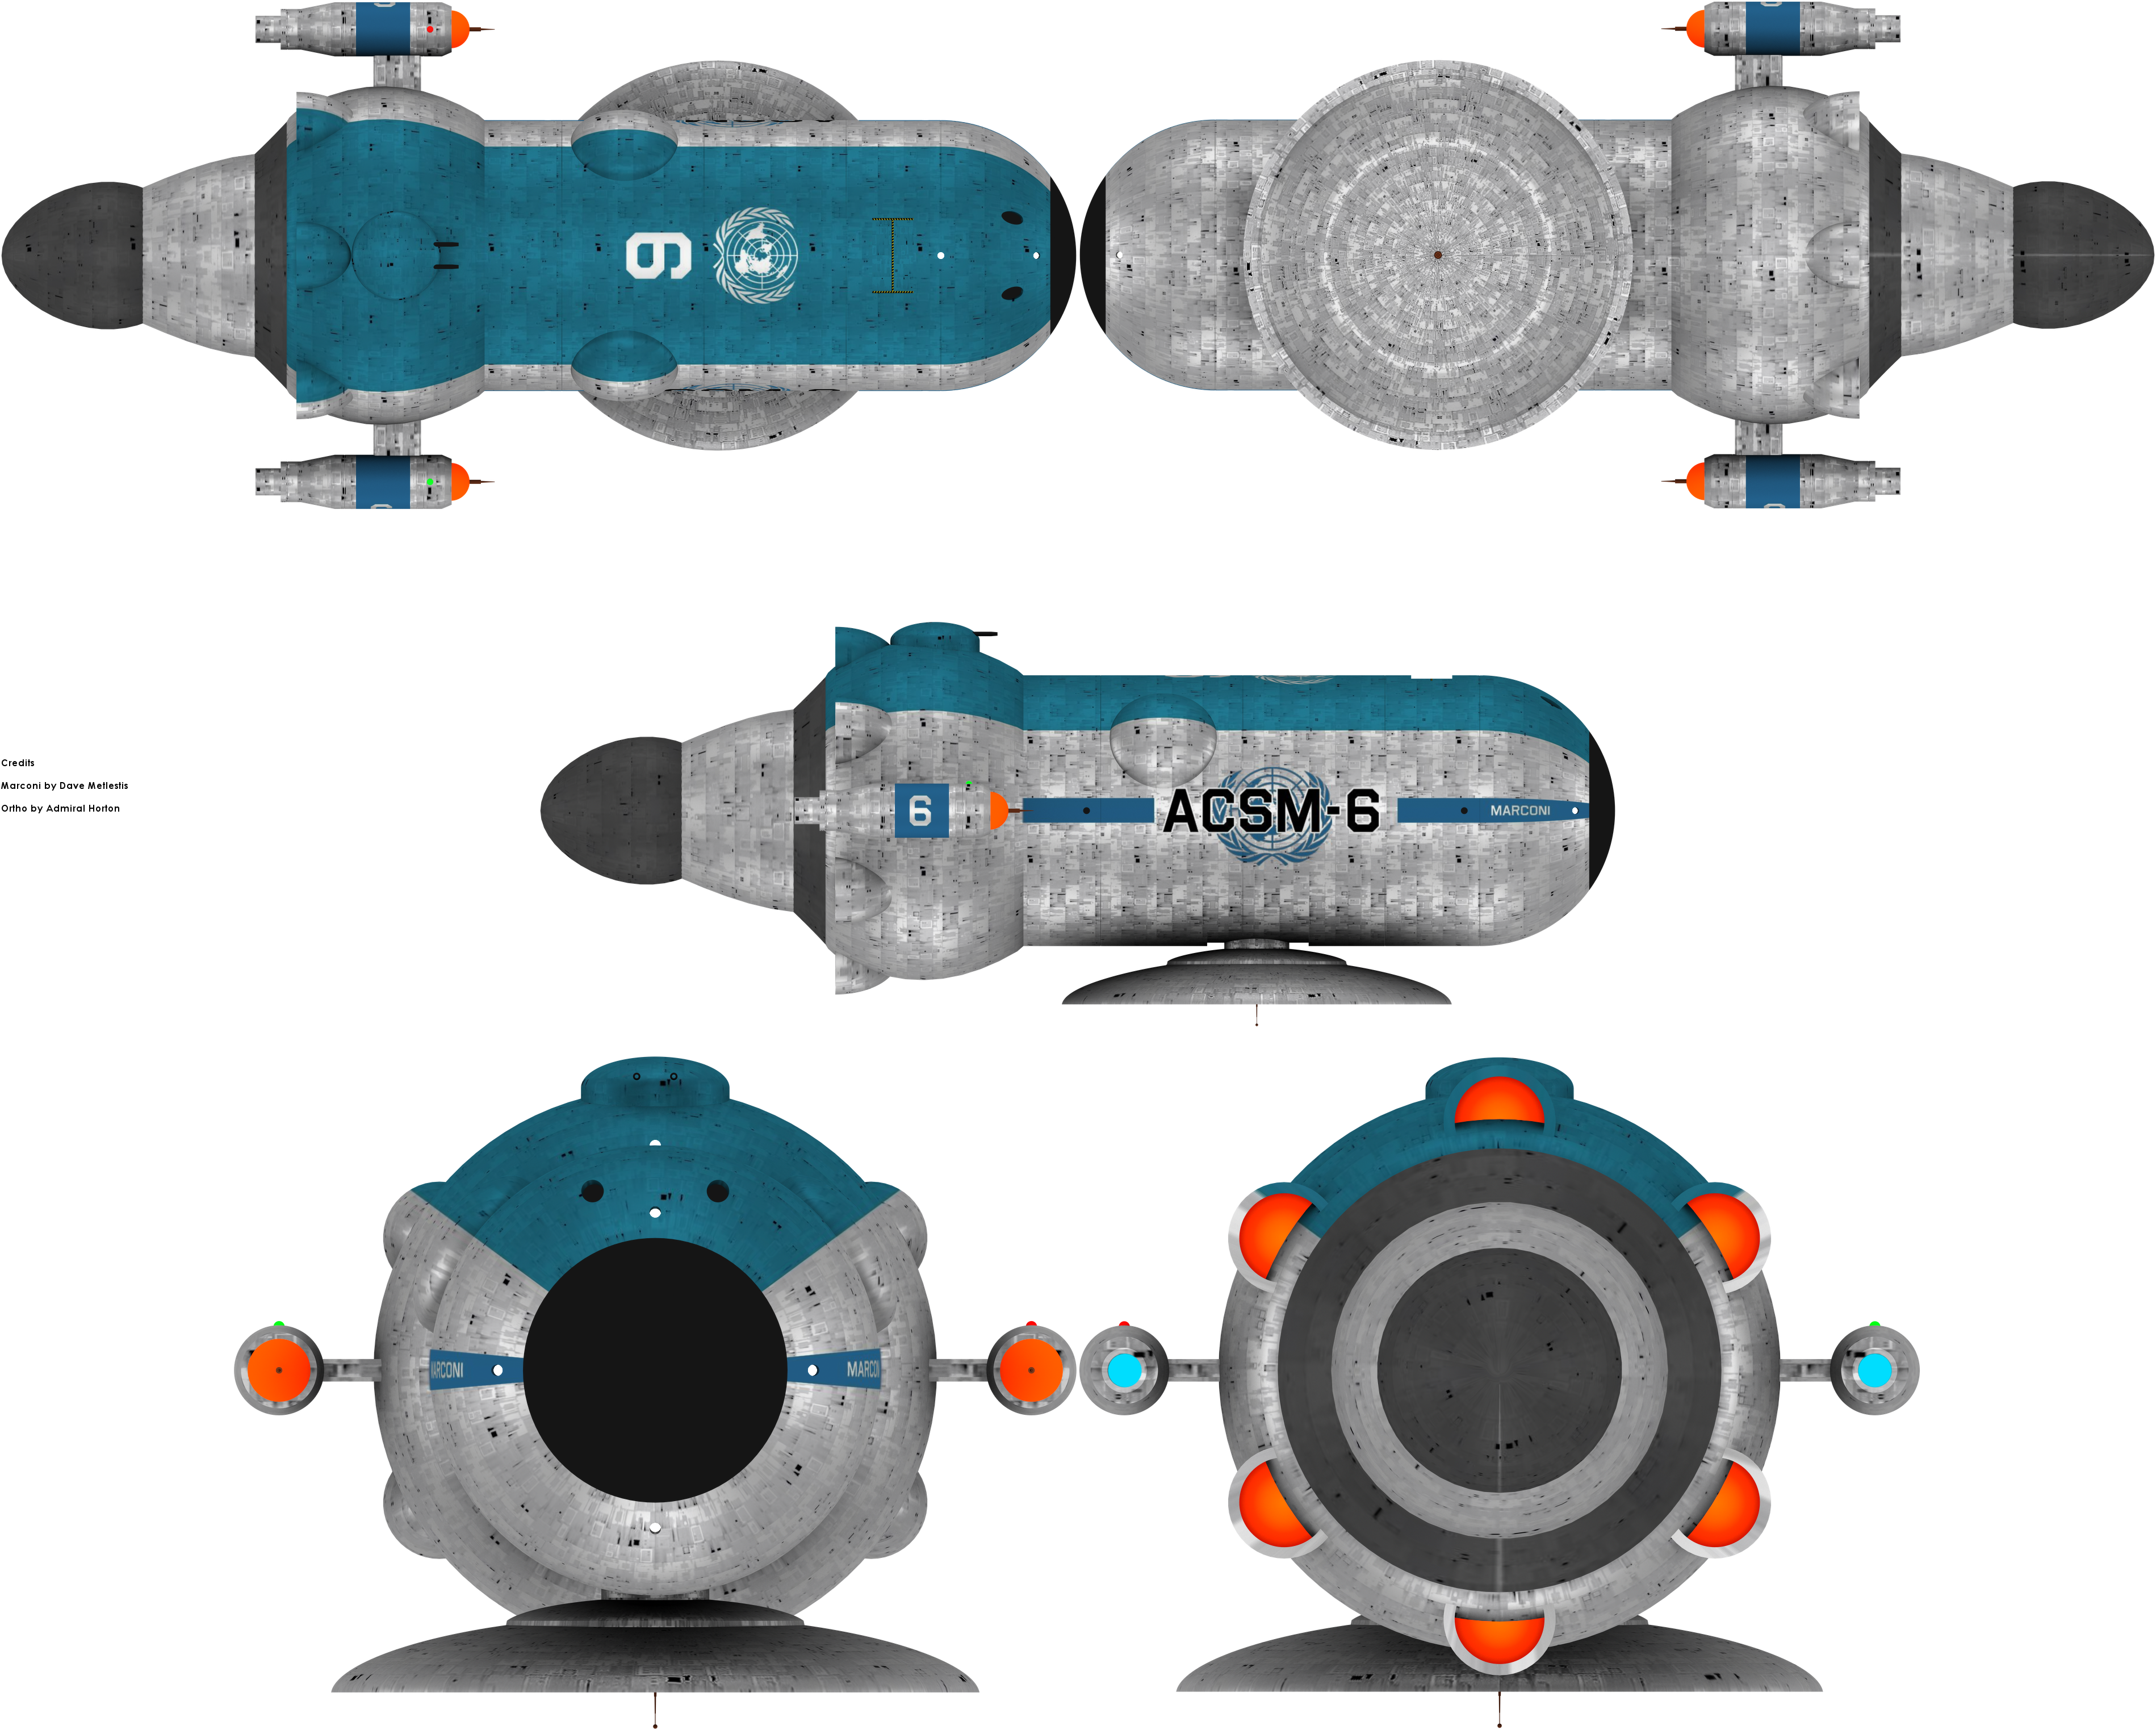 marconi_class_by_admiral_horton-db4tclt.png